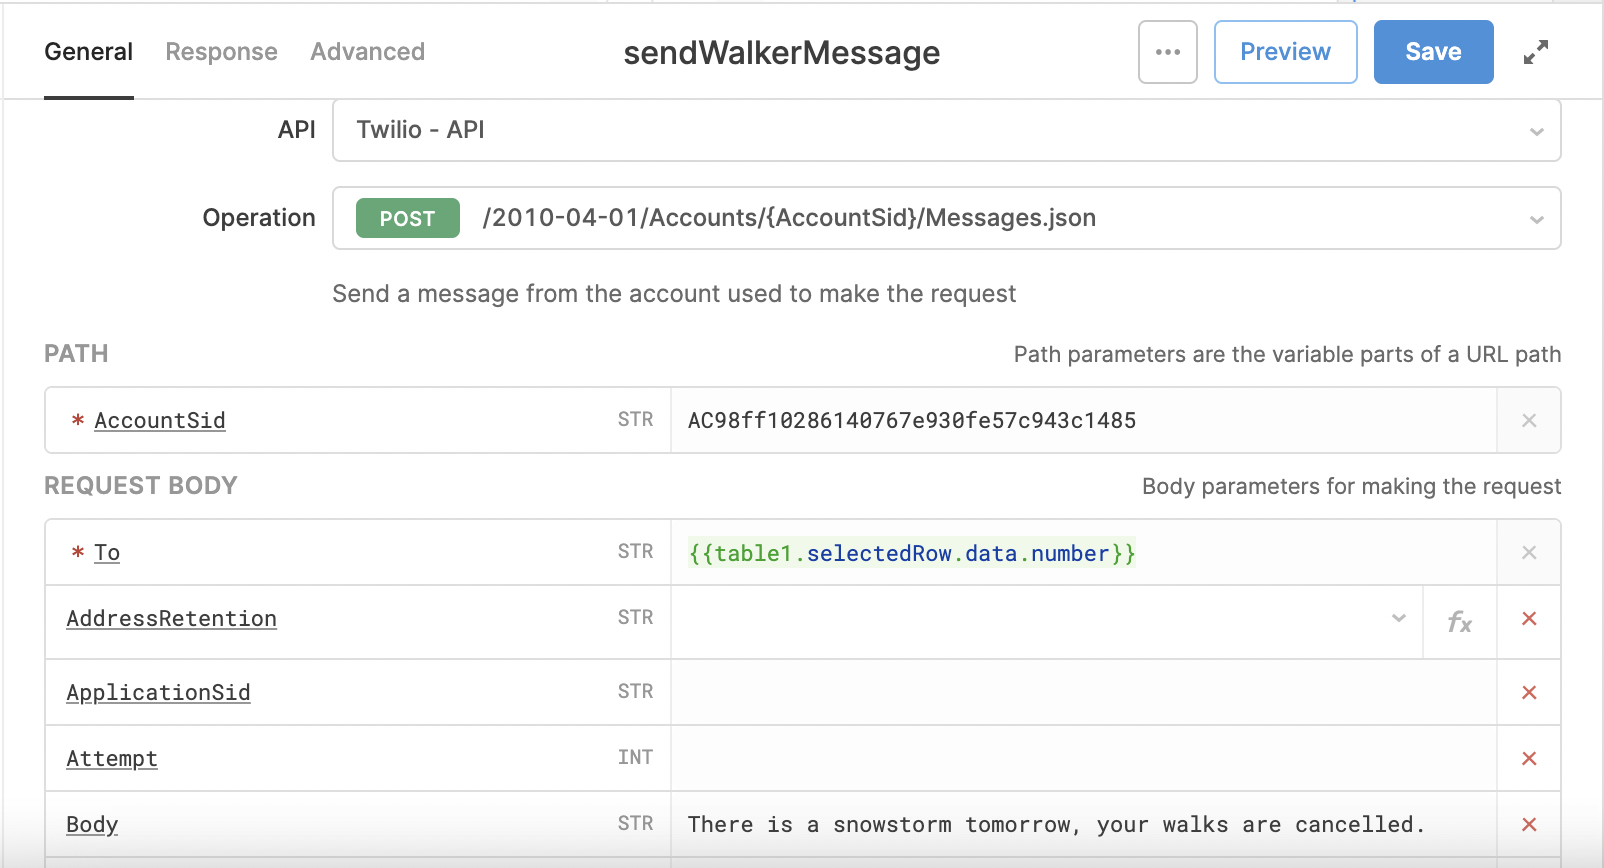 A preview of the values for our Twilio API request.